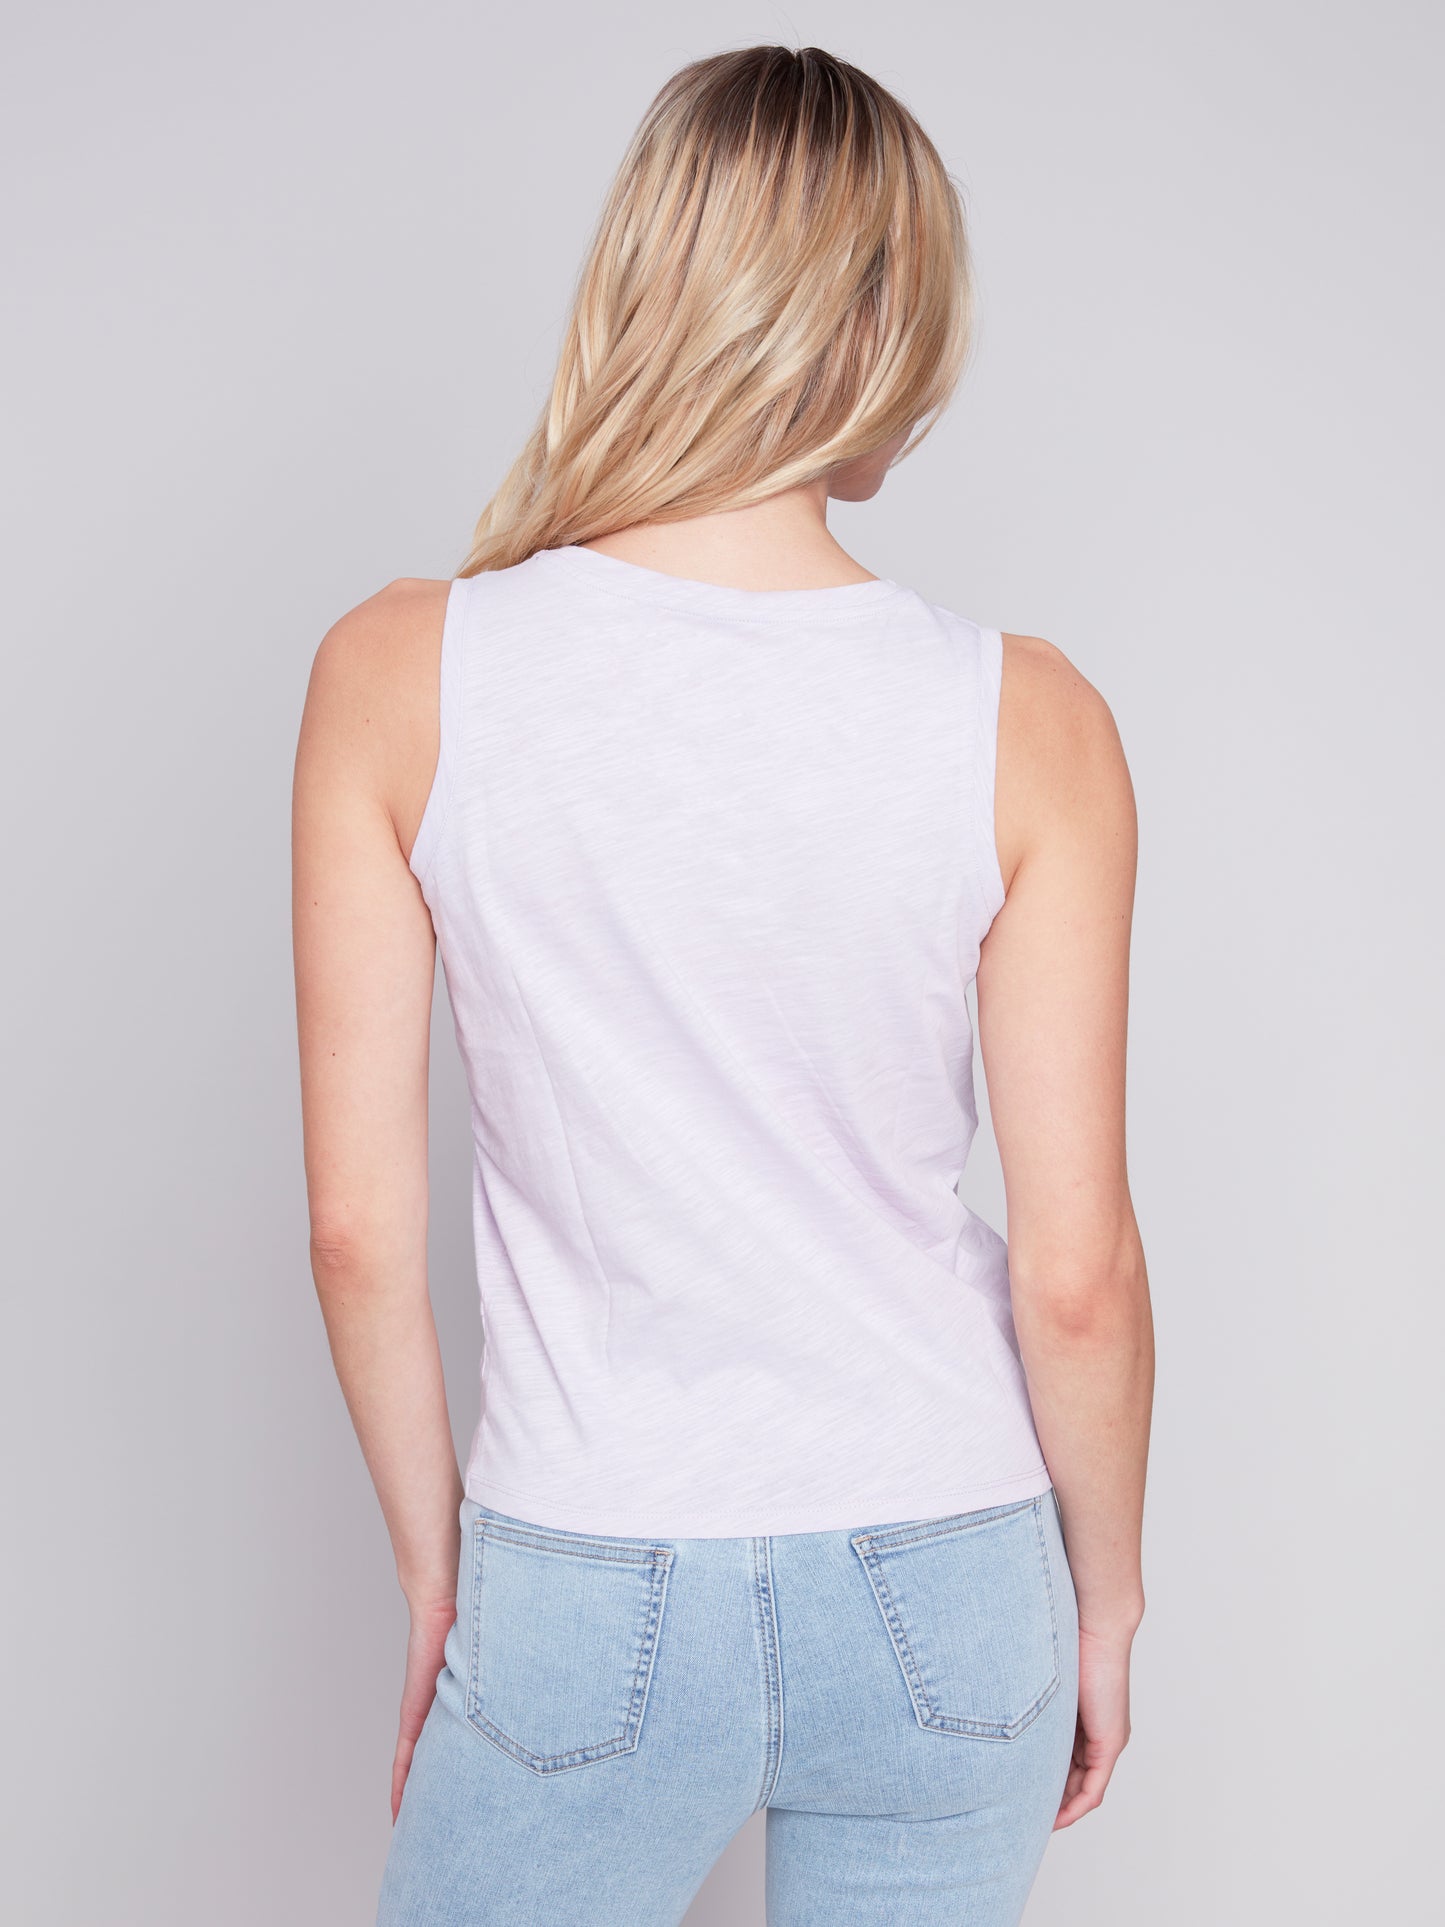 Woman in versatile, high-quality Charlie B crew neck tank tops and casual sportswear posing against a gray background.